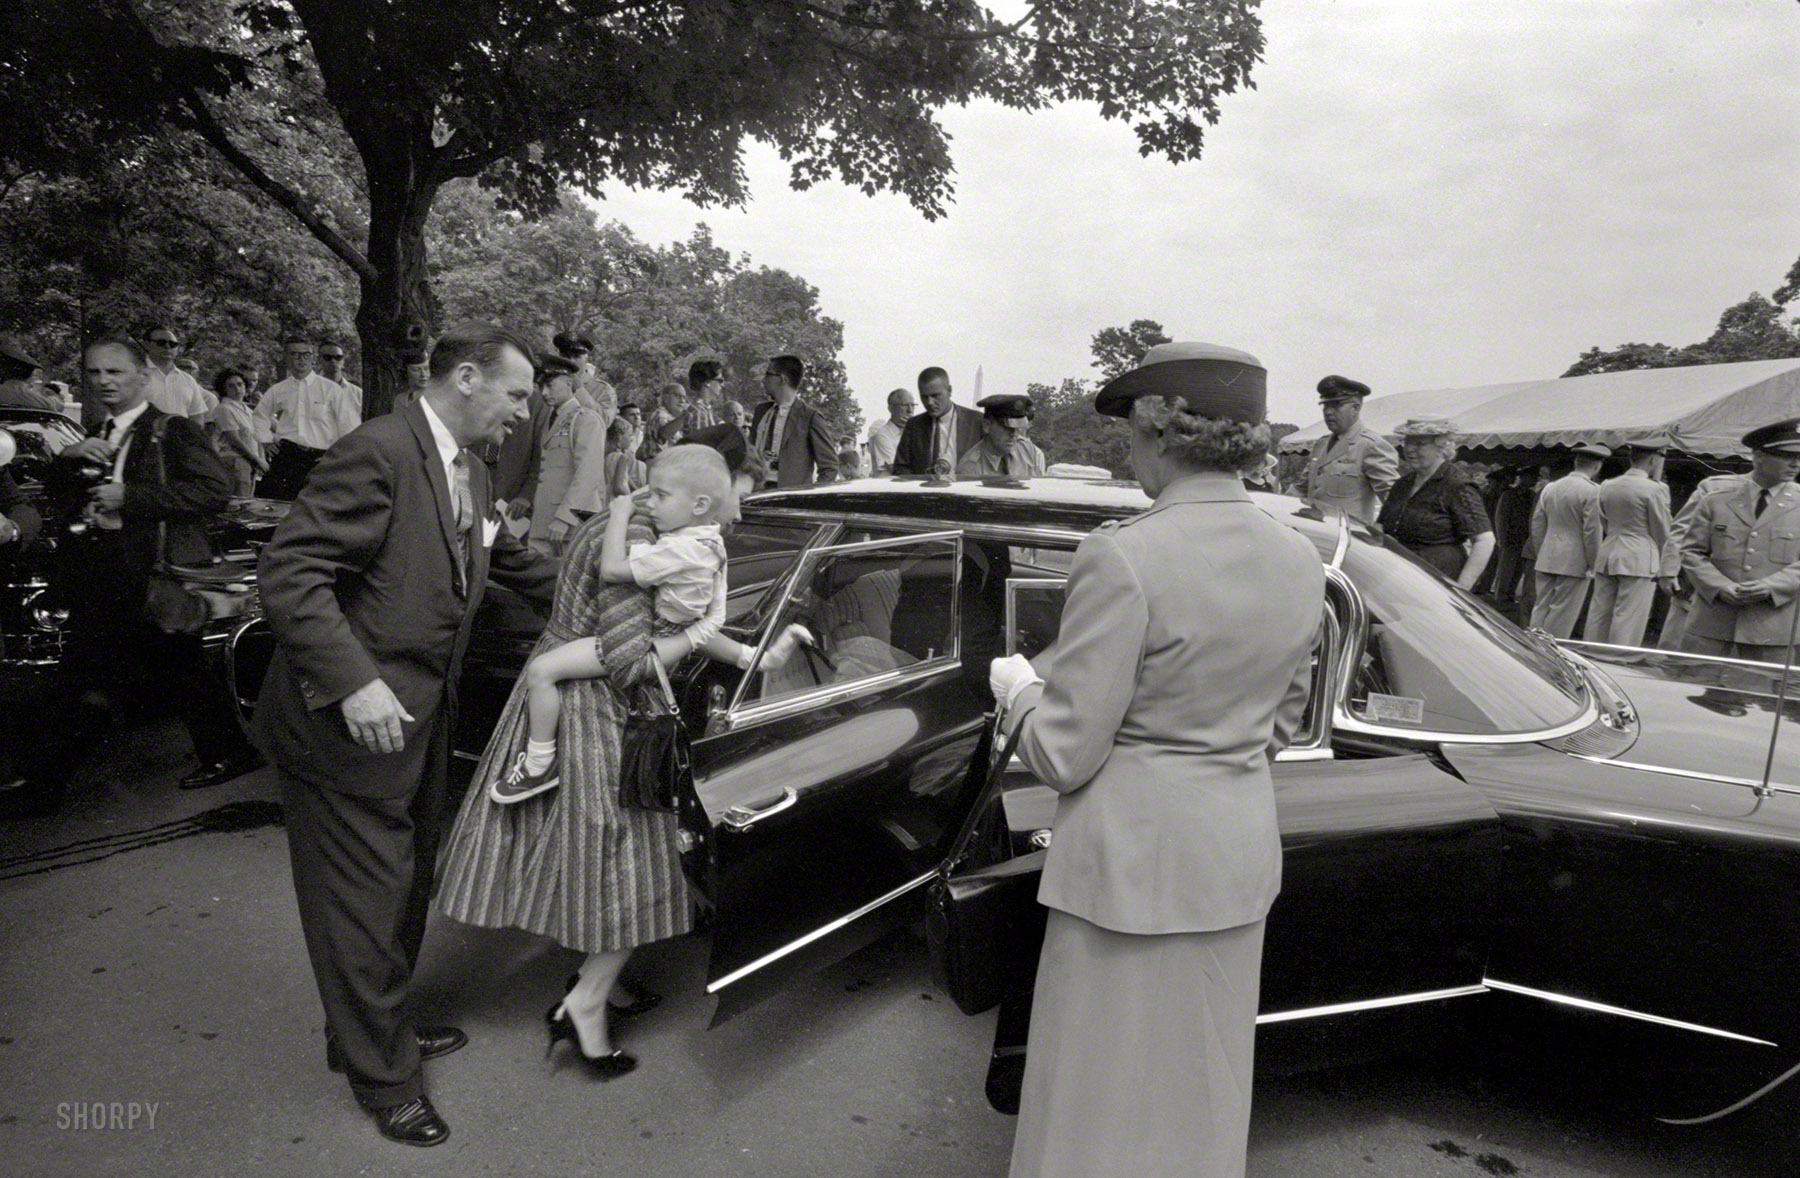 August 4, 1960. "Family and mourners at the Arlington National Cemetery burial of Willard G. Palm, RB-47 reconnaissance airplane pilot shot down by the Russians." Photo by John T. Bledsoe, U.S. News & World Report. View full size.